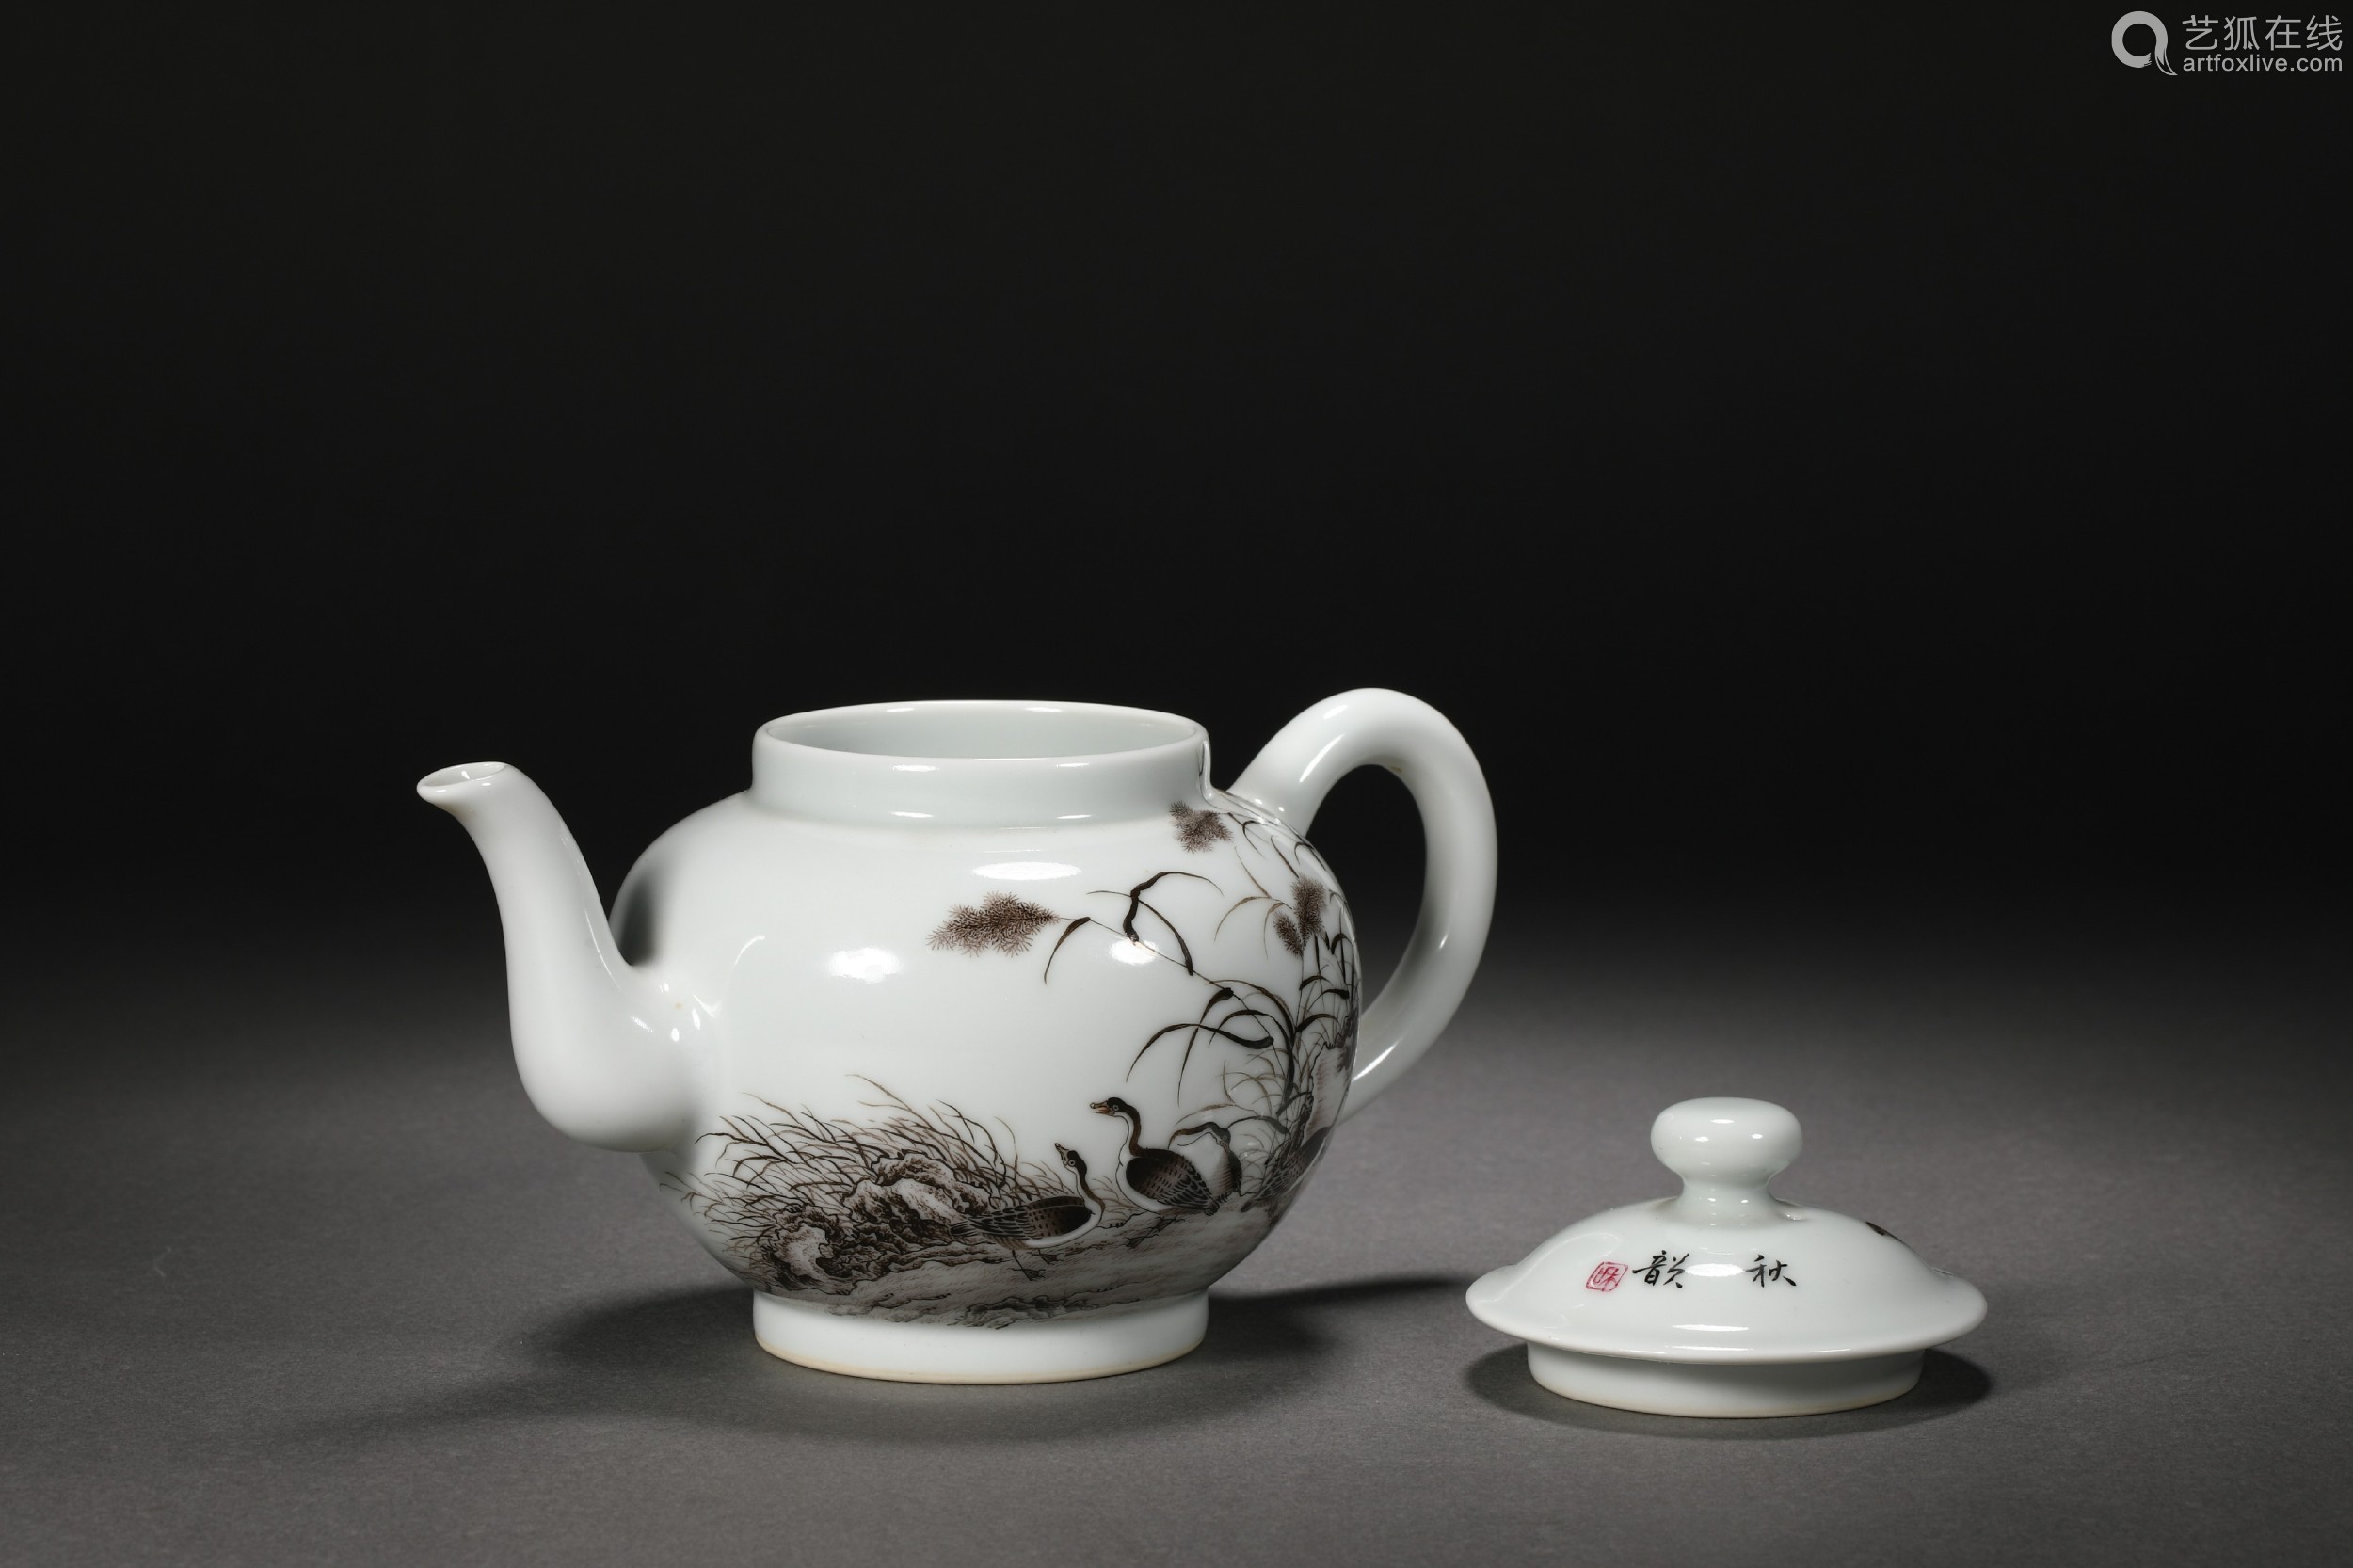 Teapot with flower and bird pattern